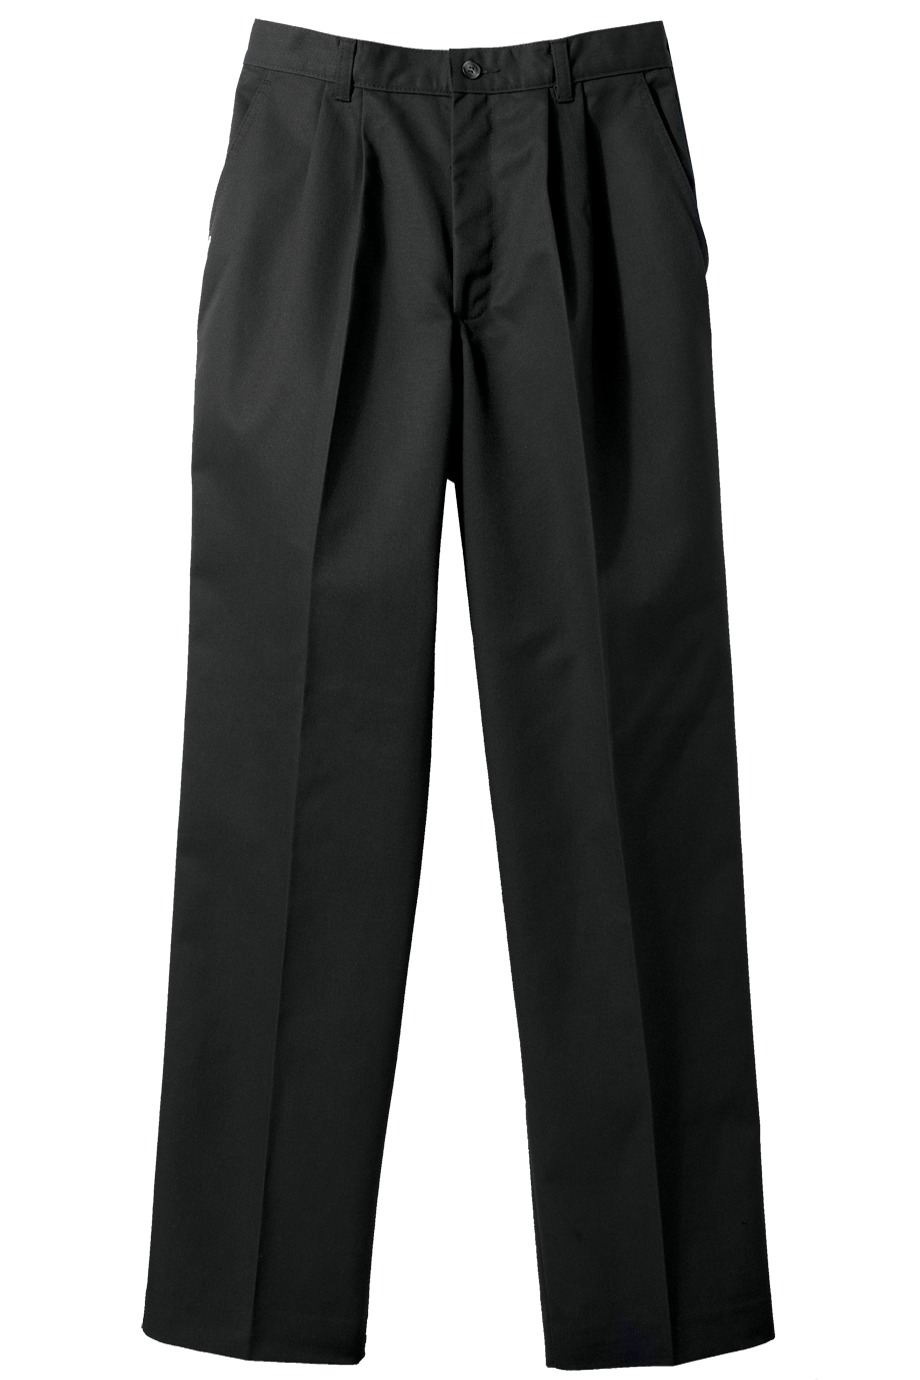 Edward's Women's Pleated Front Blended Chino Pants